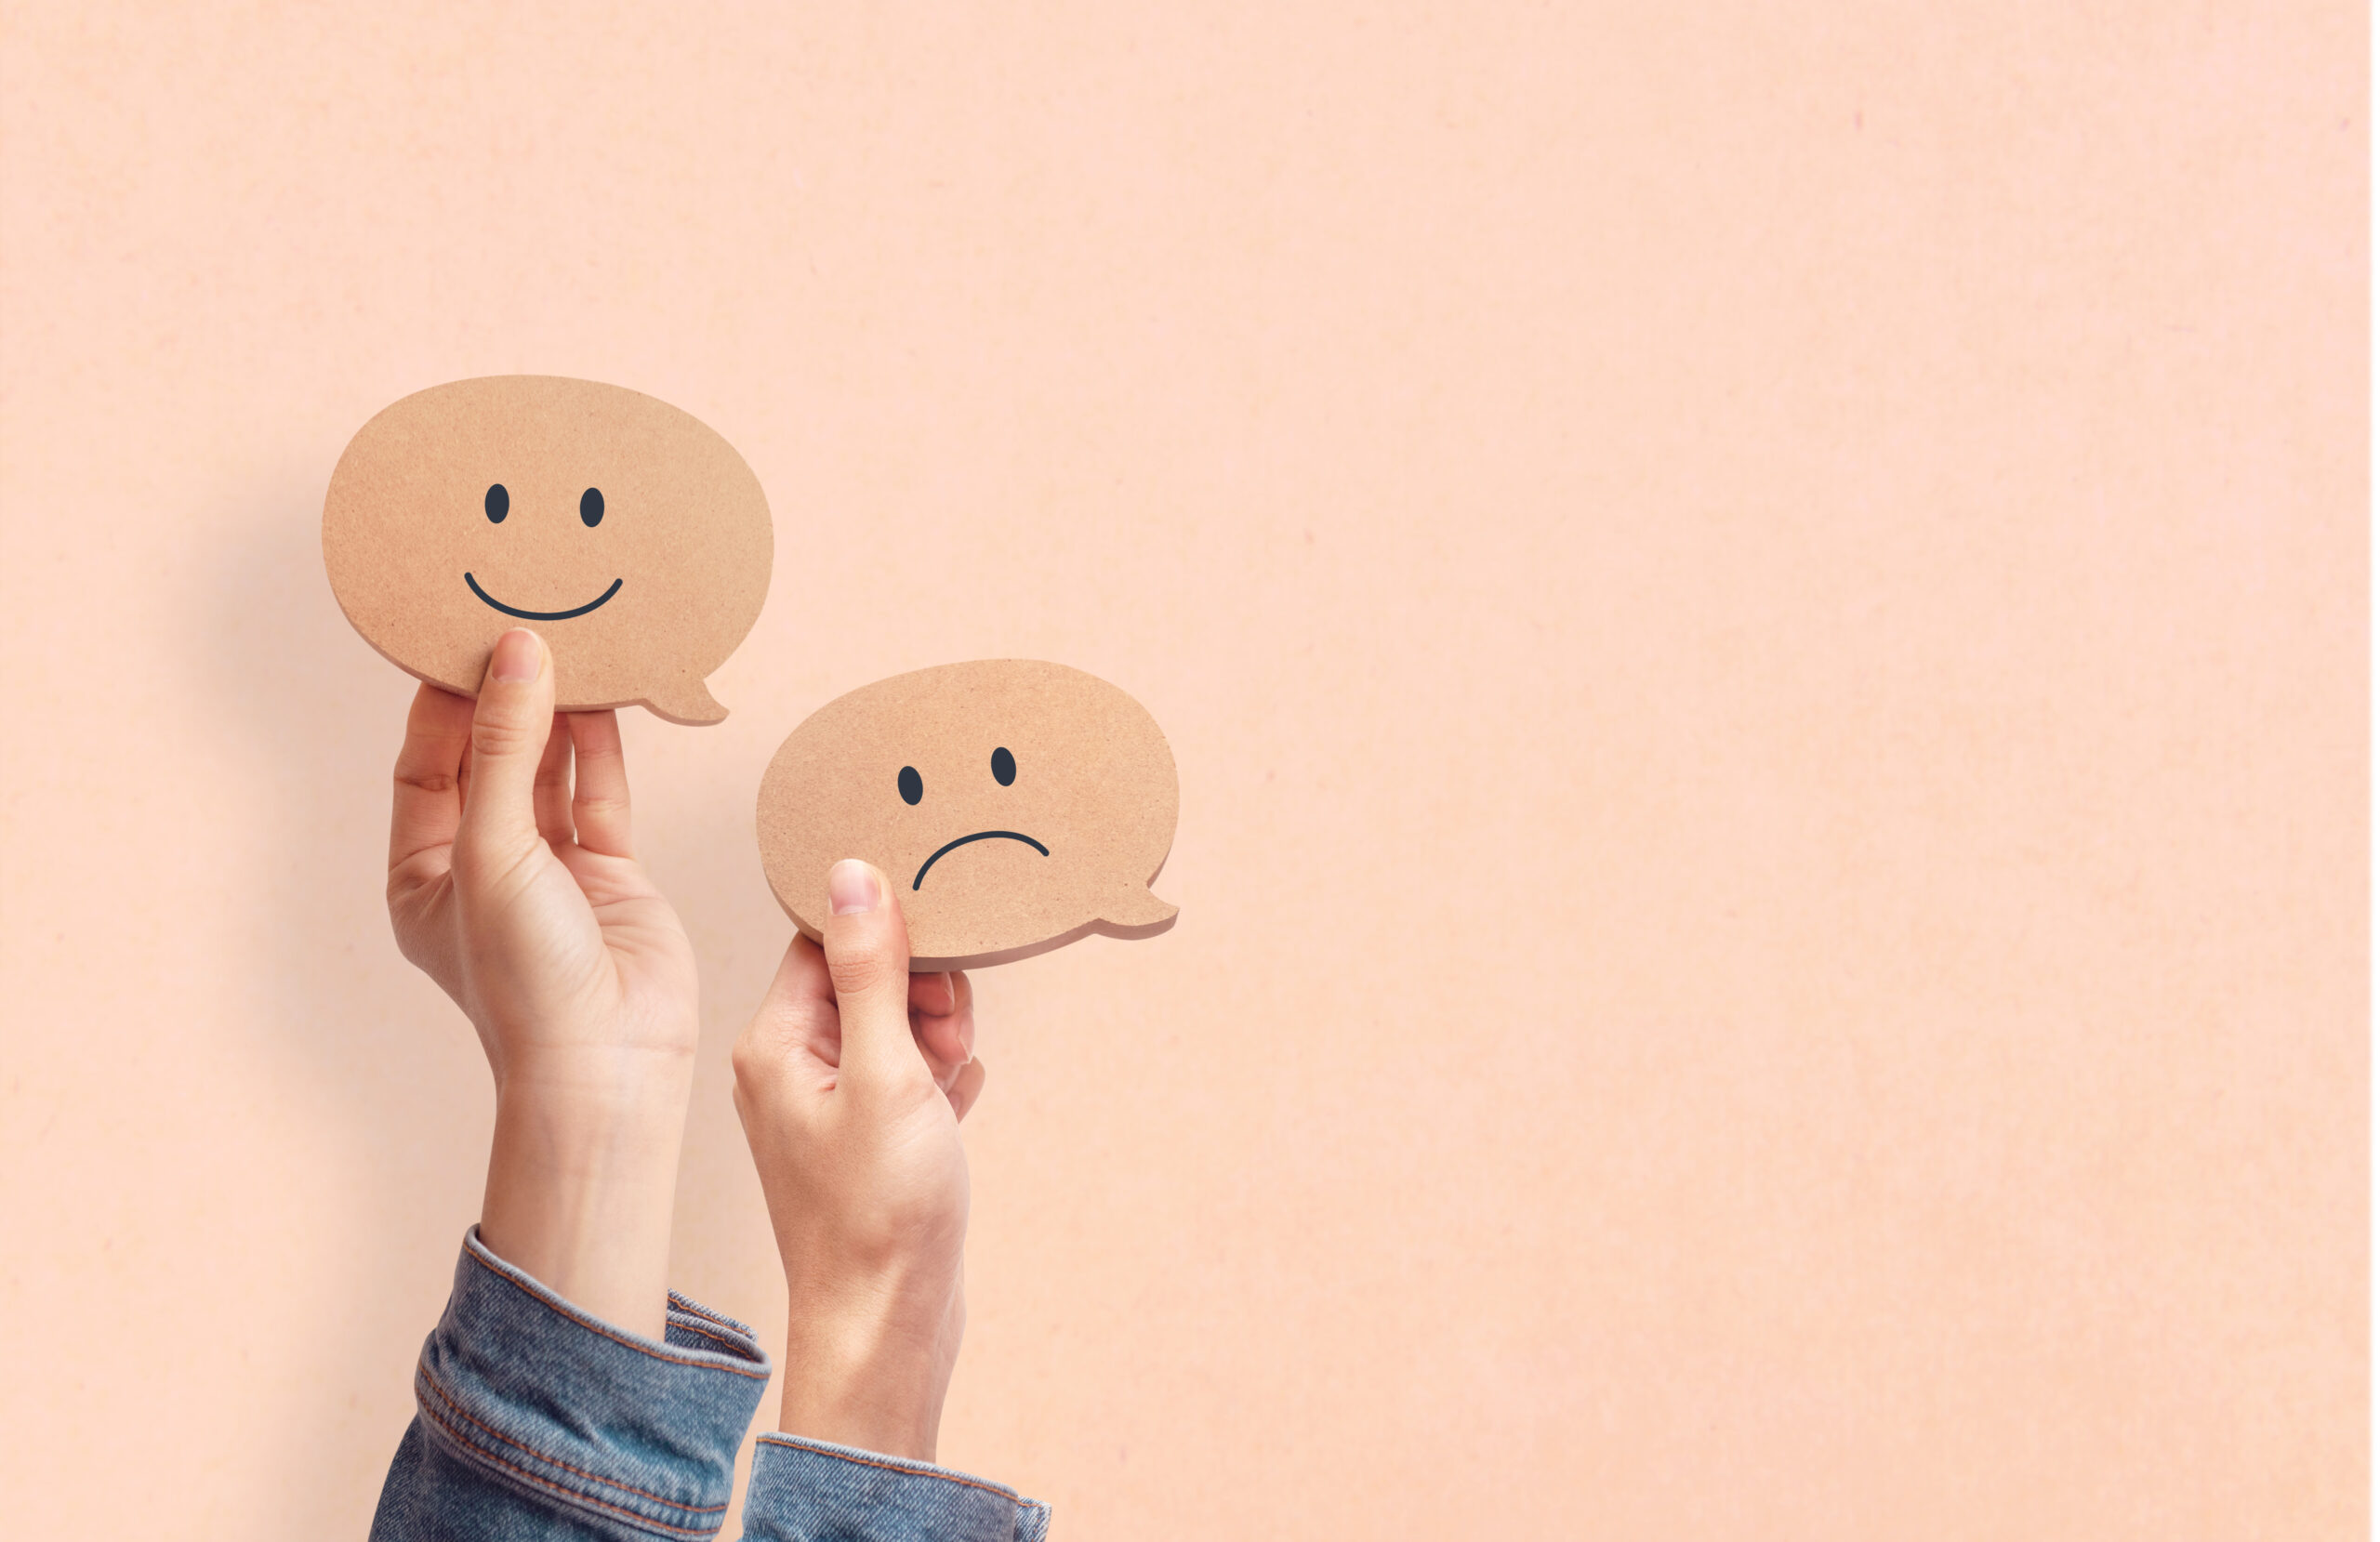 One hand holding a smiley face and the other holding a frowny face [Why Your Donor May Be Confused About Their Relationship With You]